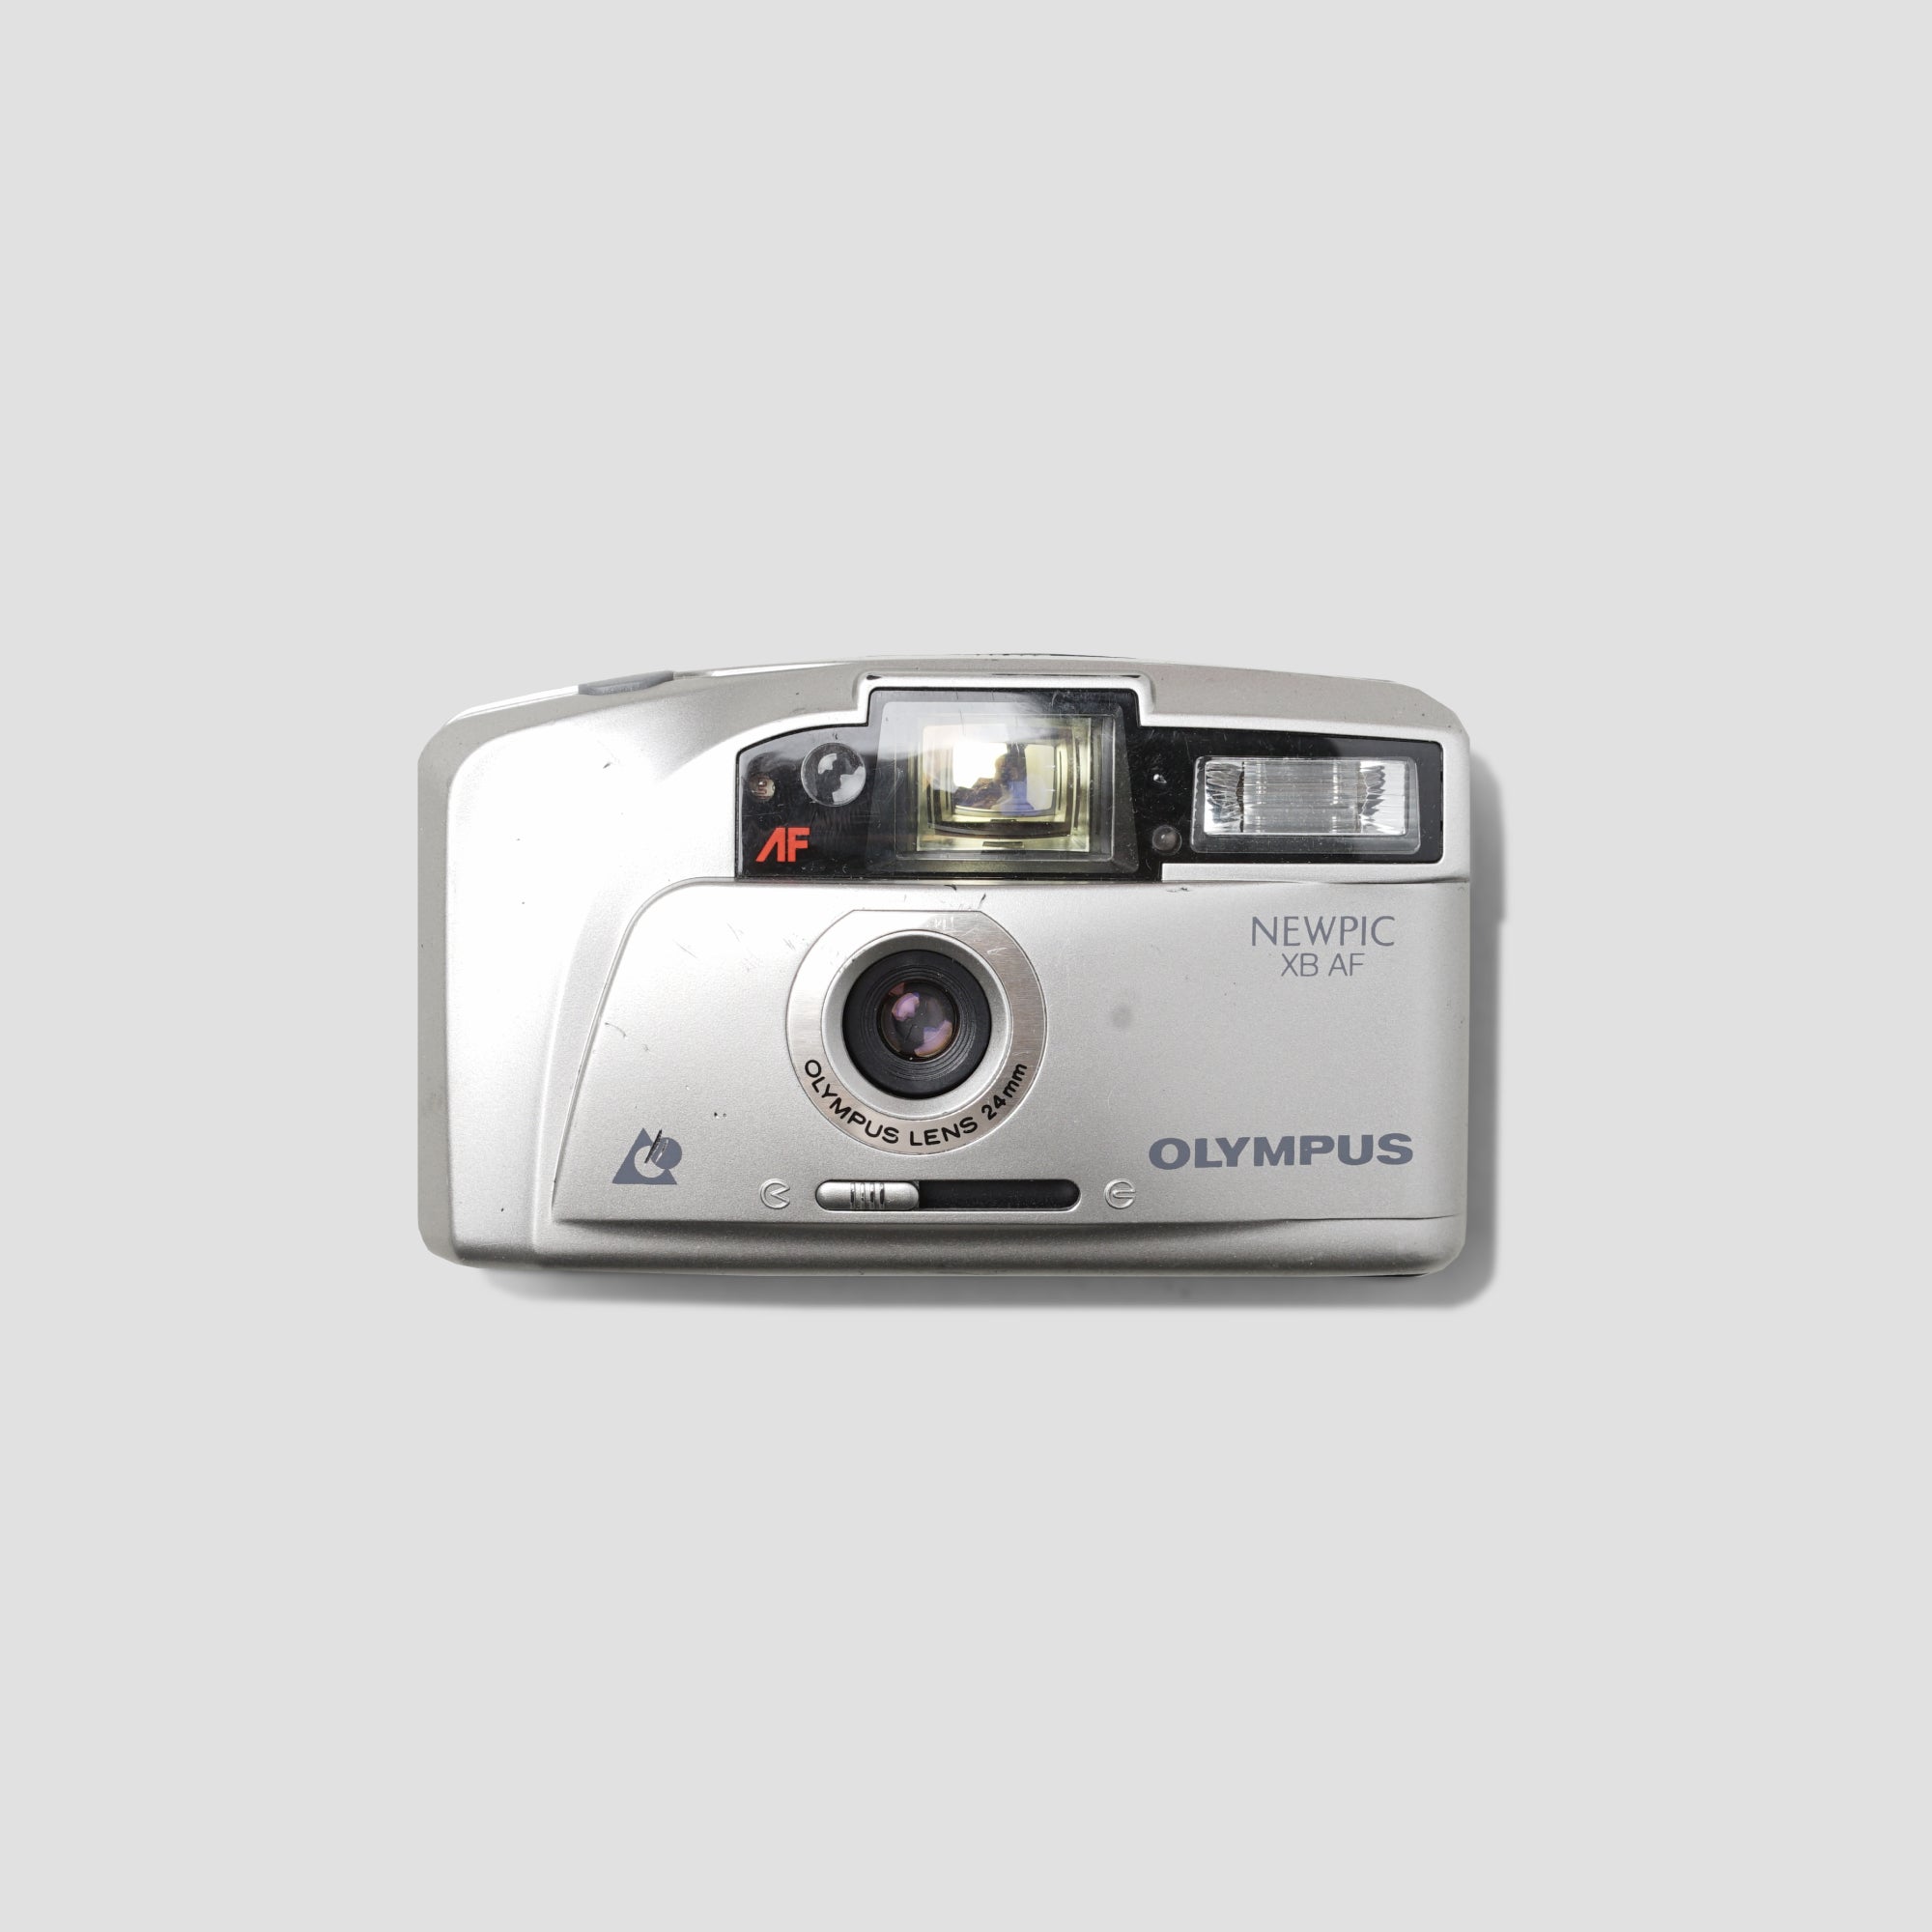 Buy Olympus Newpic XB AF now at Analogue Amsterdam